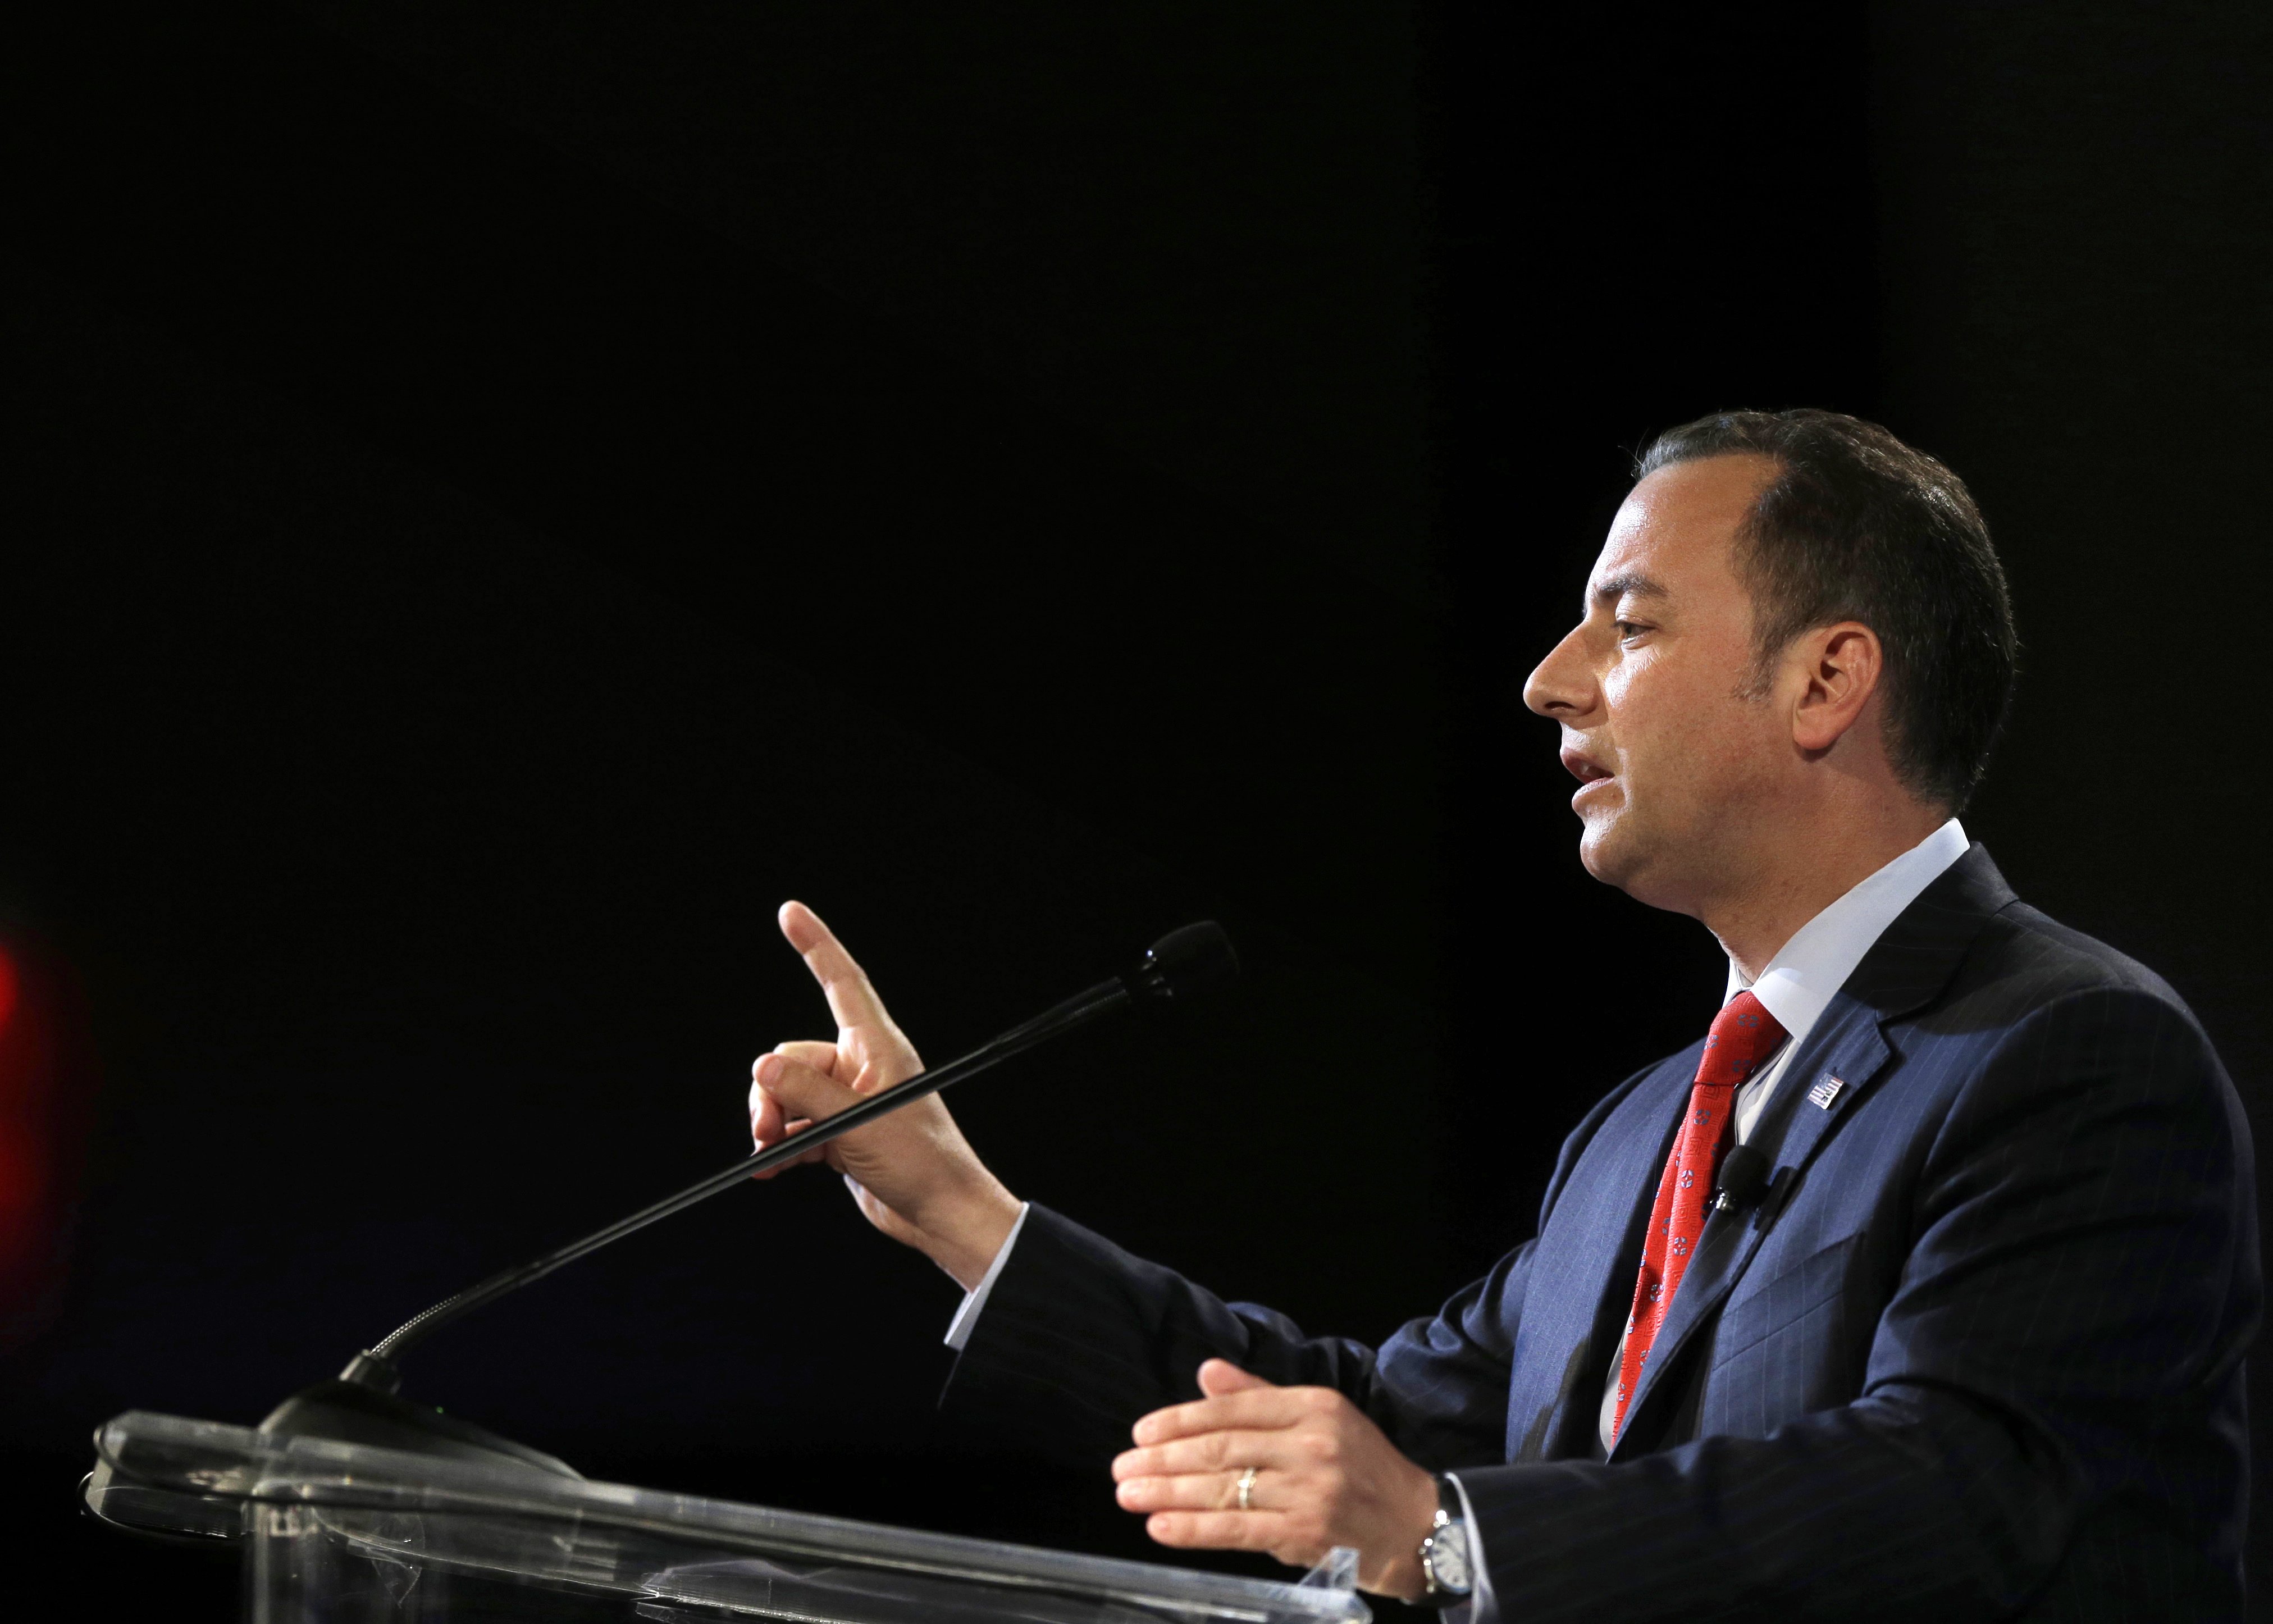 Chairman of the Republican National Committee Reince Priebus addresses an audience at the National Association of Black Journalists convention, Thursday, July 31, 2014, in Boston. (Steven Senne—AP)